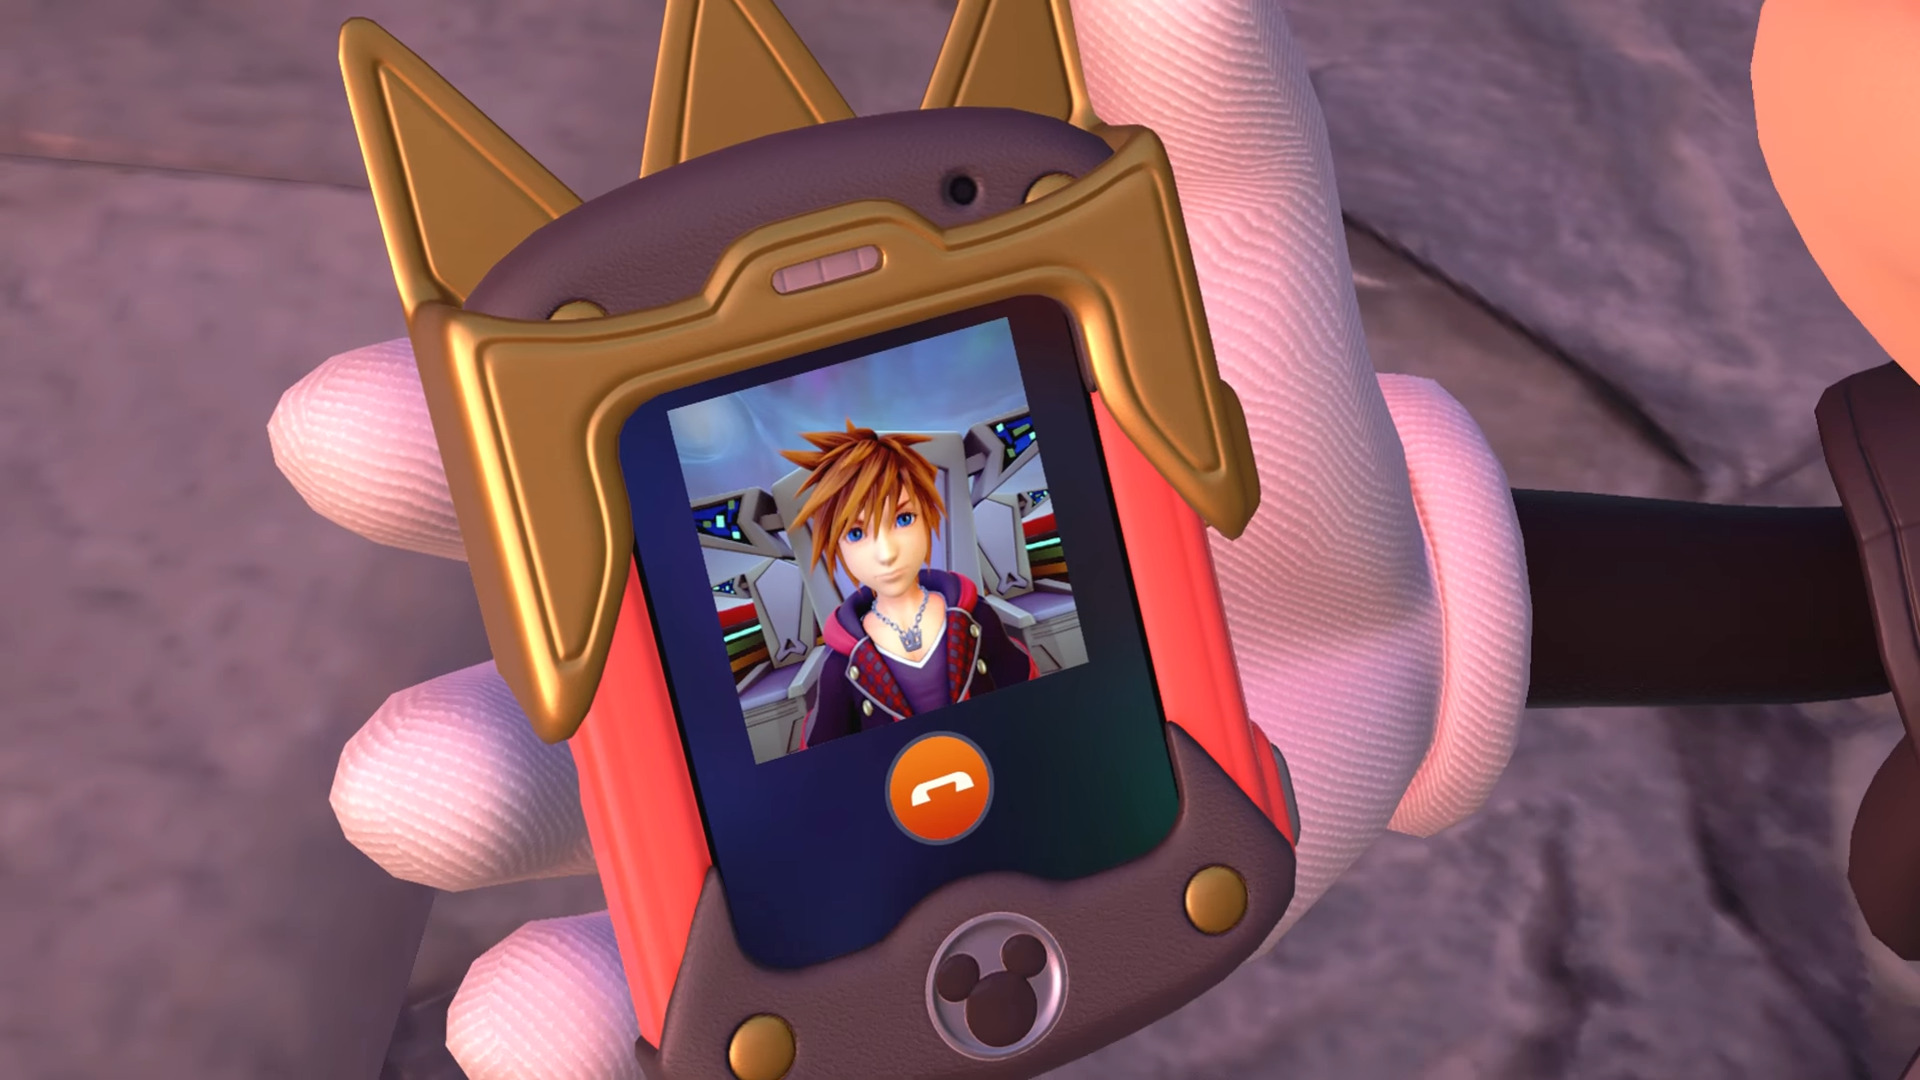 King Mickey (Chris Diamantopoulos) receives a call from Sora (Haley Joel Osment) in Kingdom Hearts 3 (2019), Square Enix